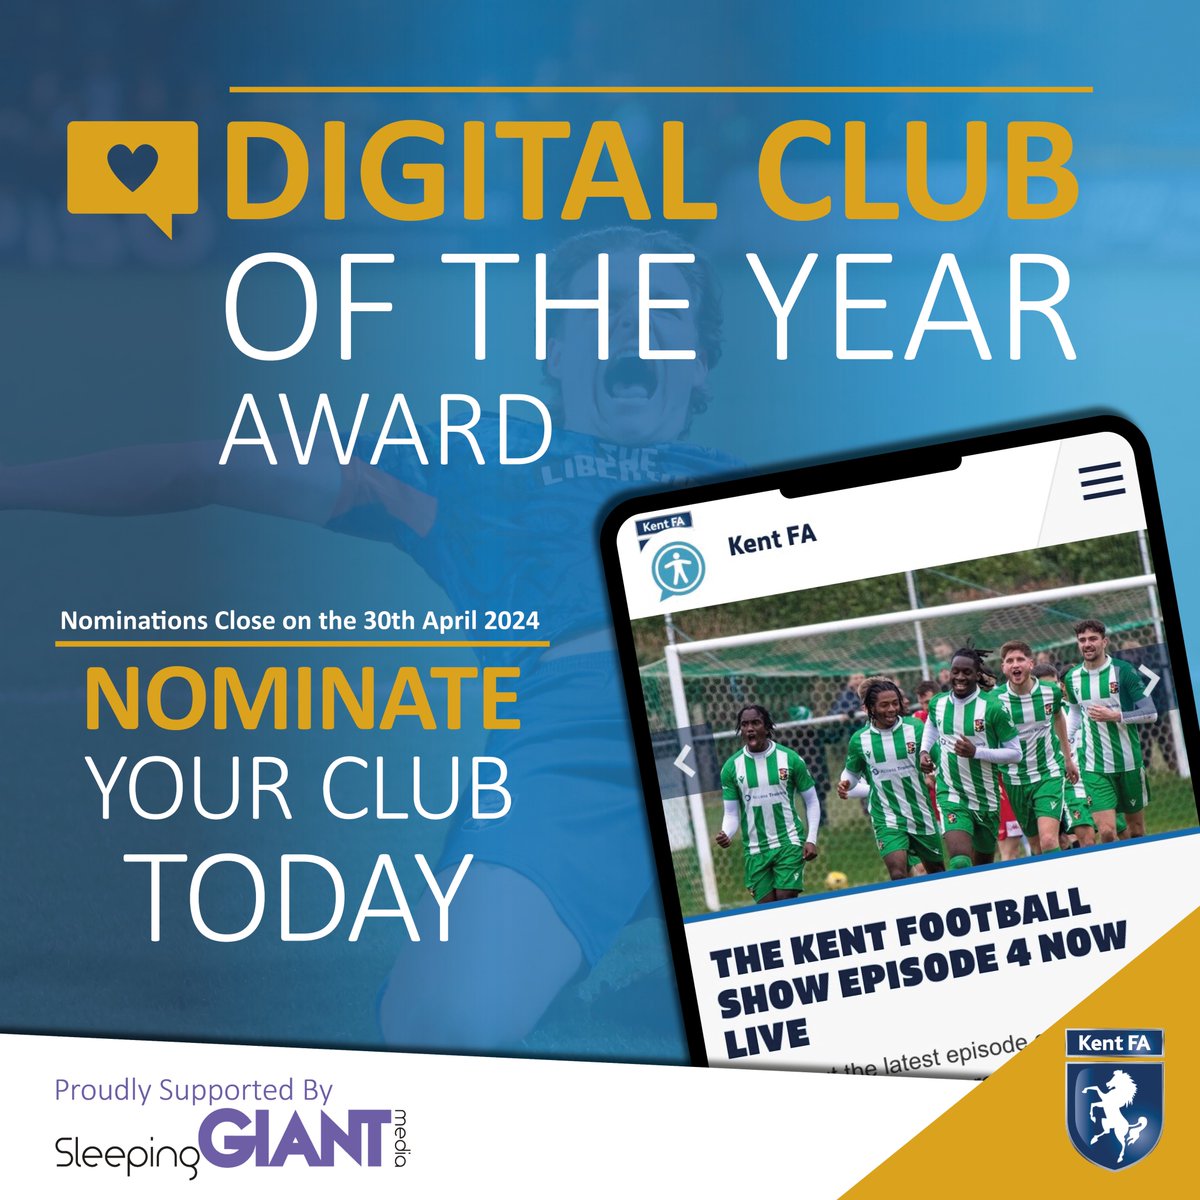 5 days left to nominate your club for The Digital Club of the Year sponsored by @SleepingGiantMedia!⏰ This award aims to celebrate those clubs who creatively engage with their members and community through their website and social media. Nominate Now bit.ly/49DOqlL